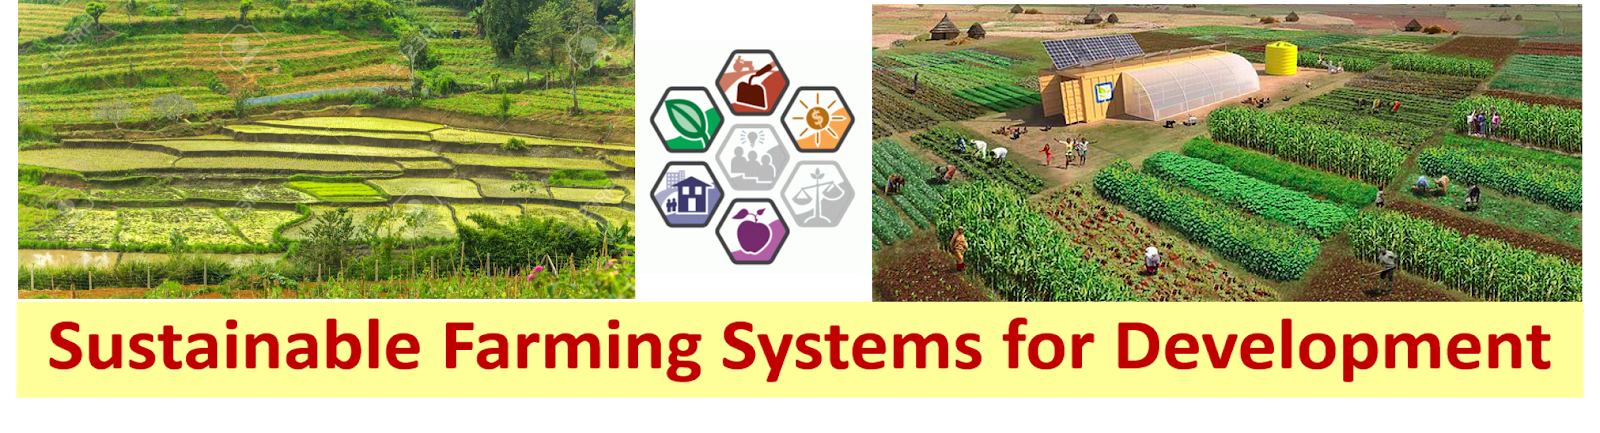 Sustainable Farming Systems for Development